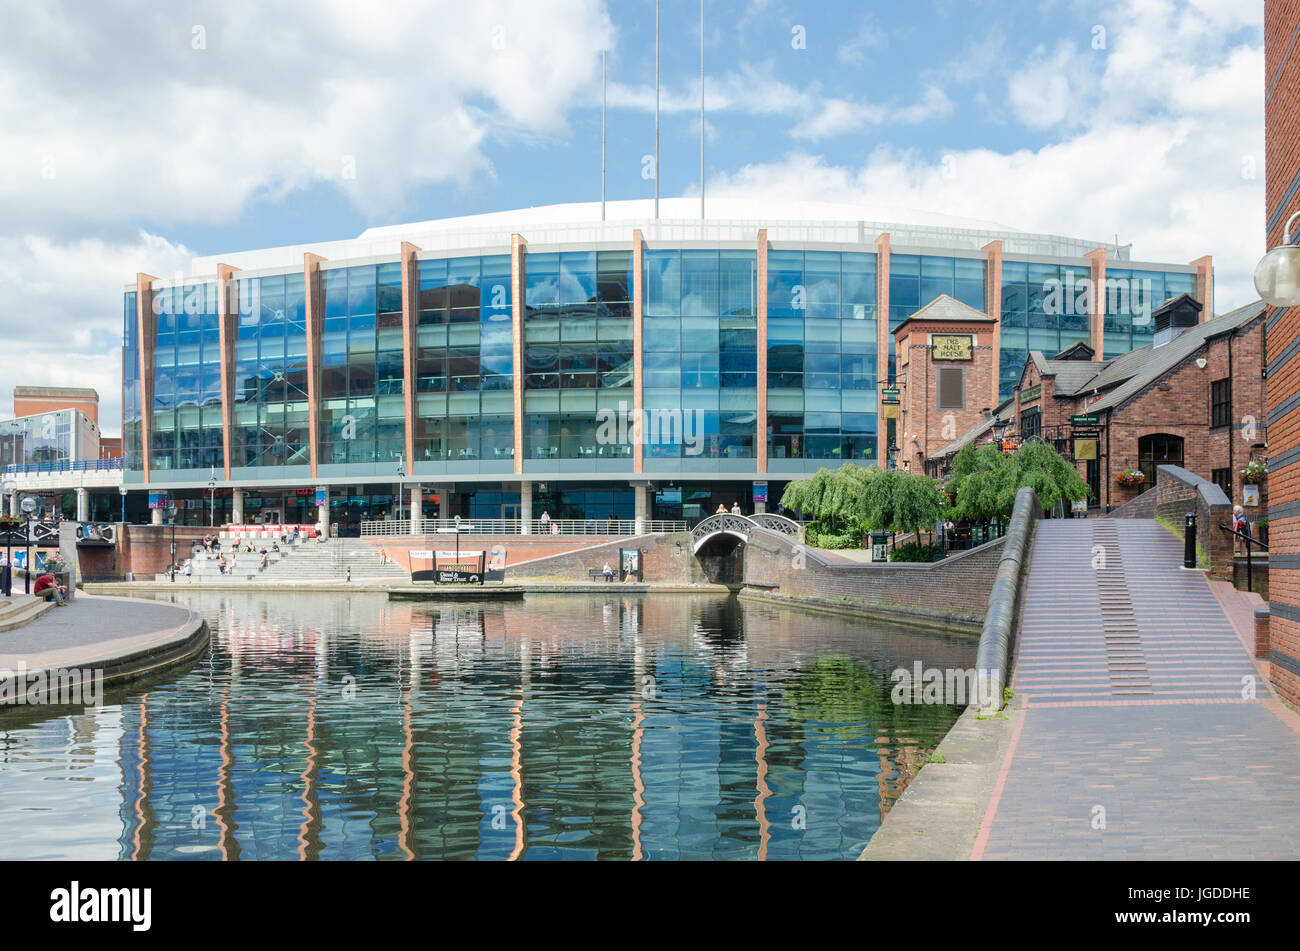 The Barclaycard Arena by the canal running through Birmingham at Brindley Place Stock Photo